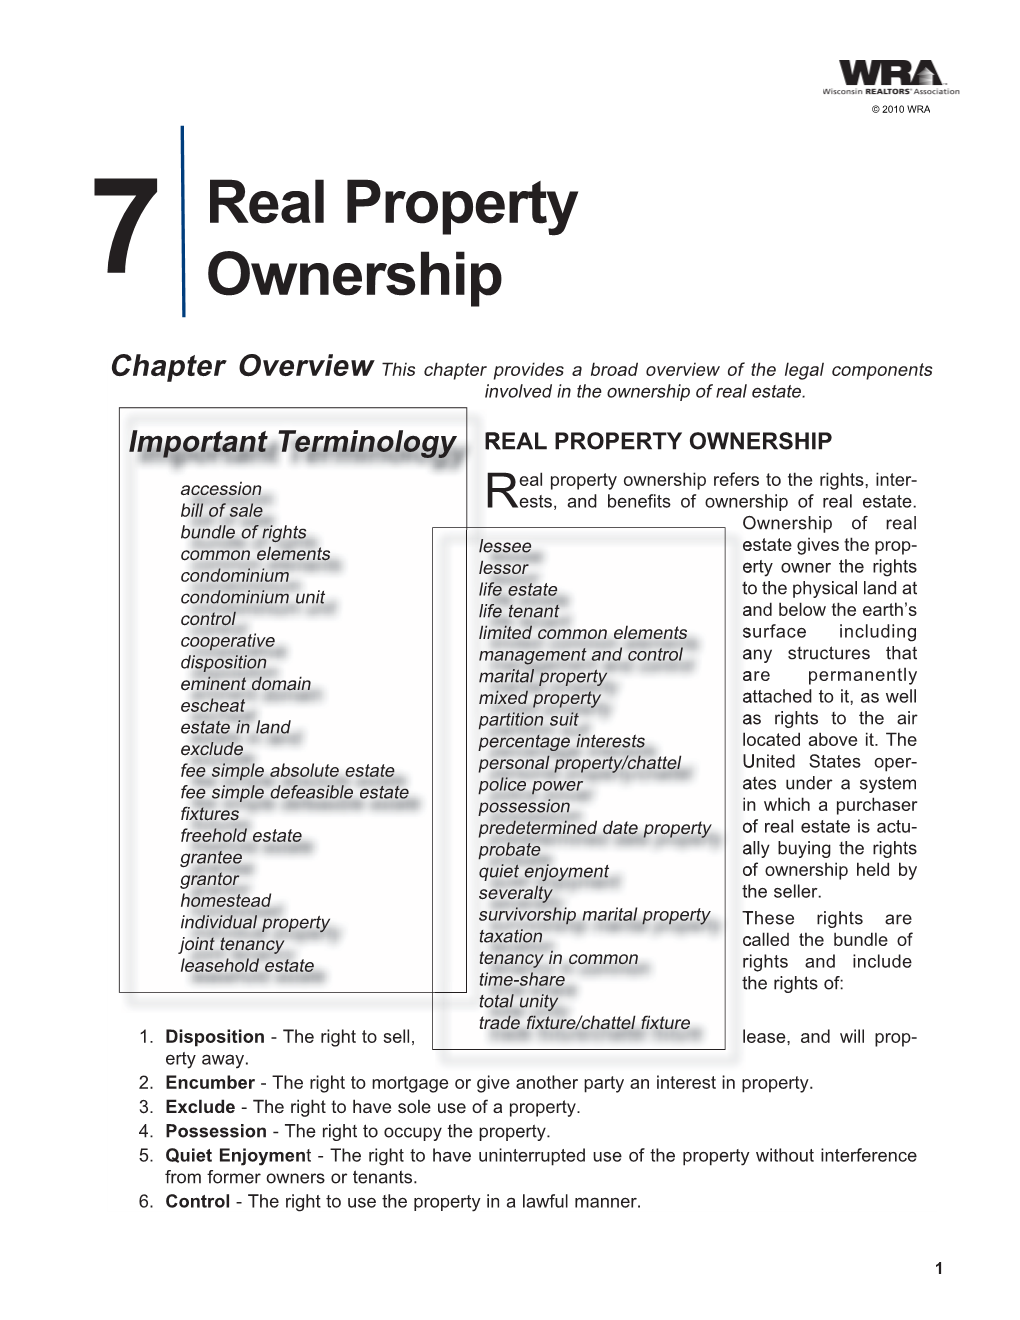 7 Real Property Ownership